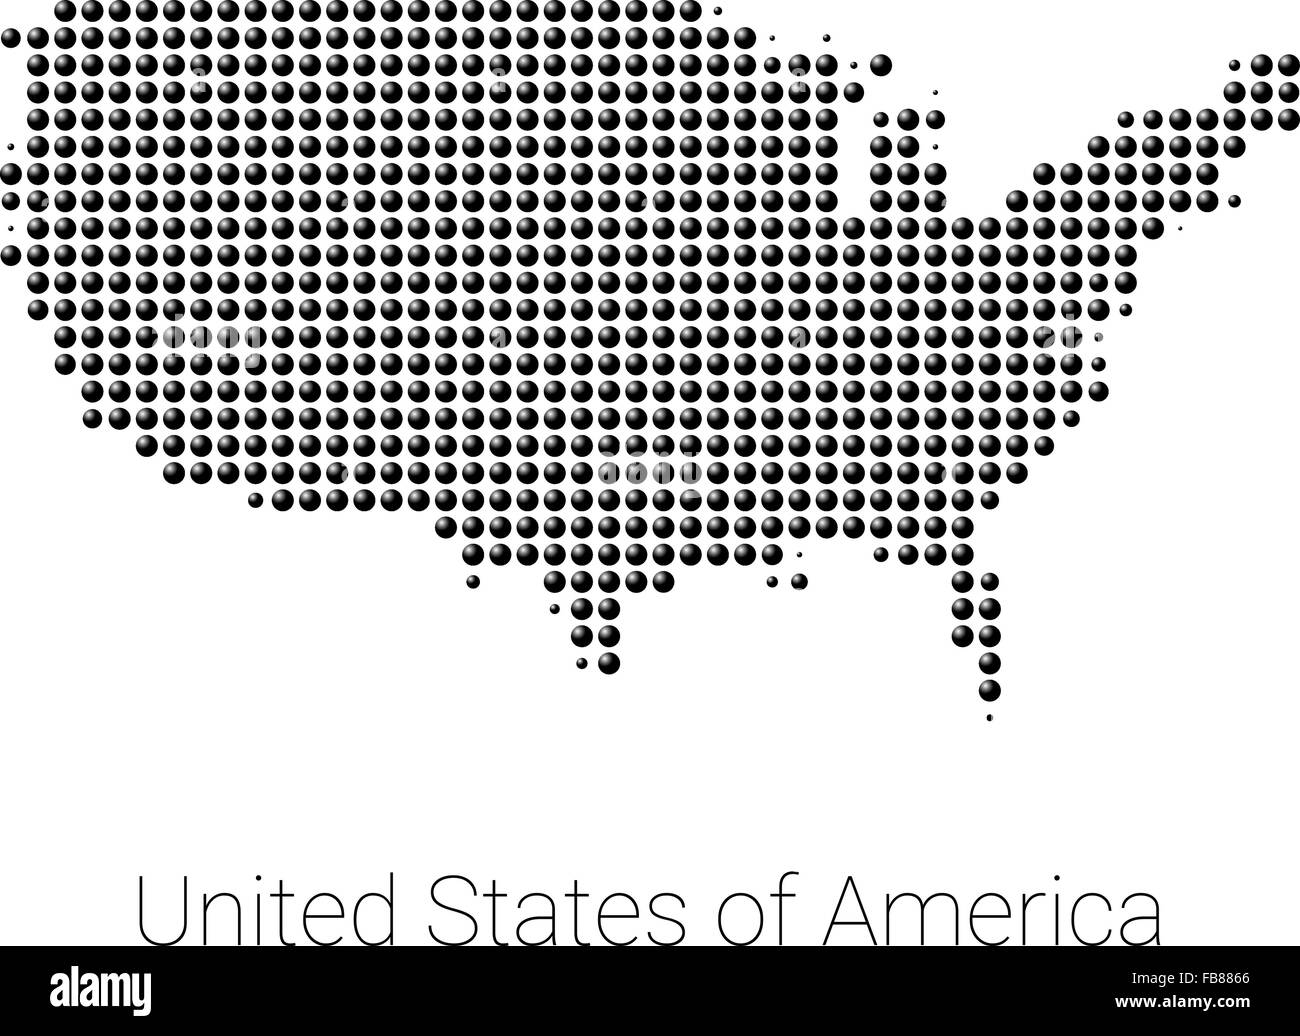 usa-map-vector-black-dotted-design-stock-vector-image-art-alamy